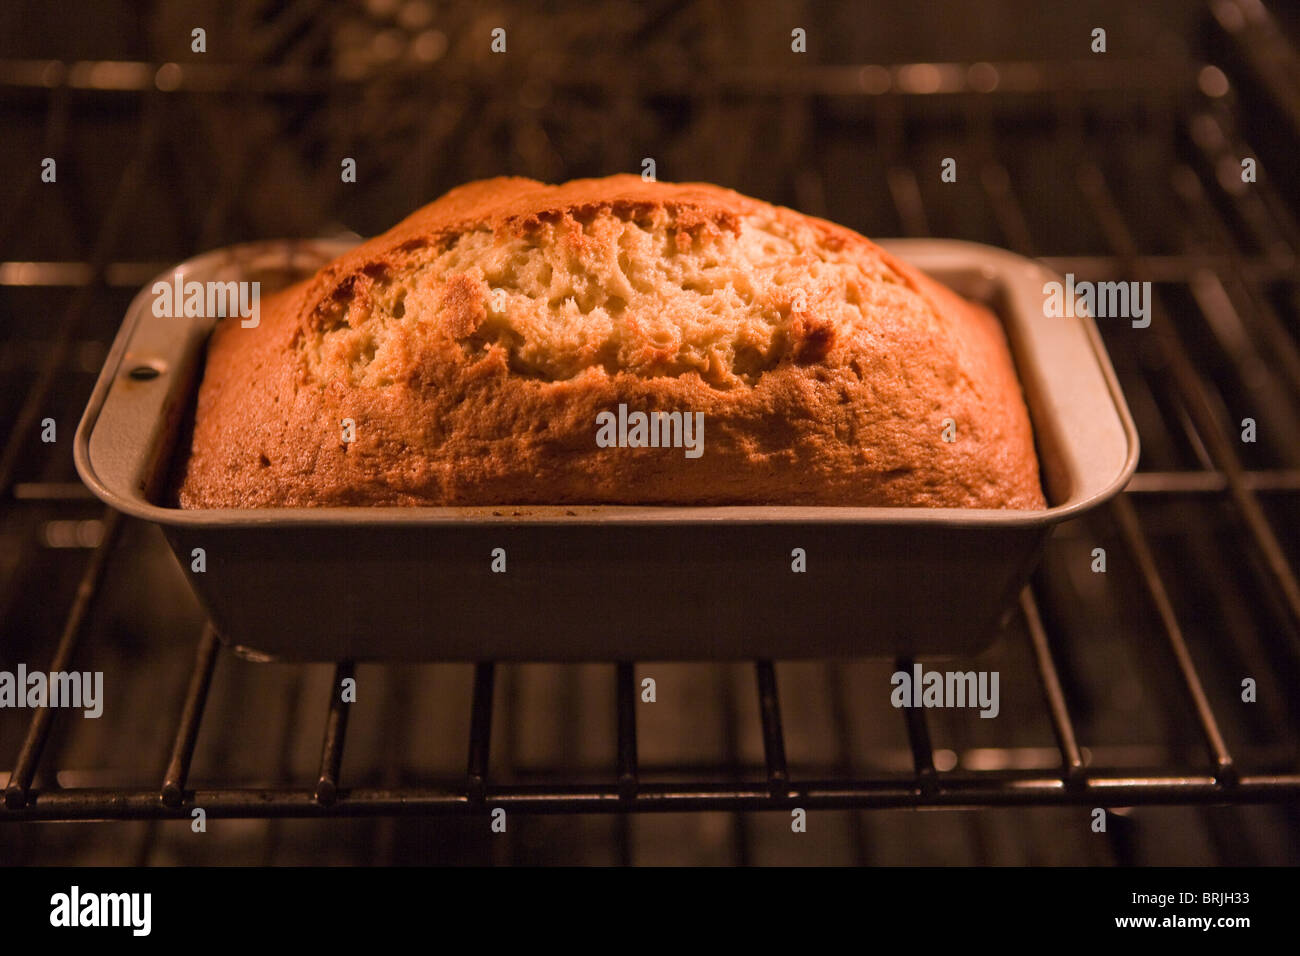 Home made banana bread baking in the oven, finished baking. Stock Photo